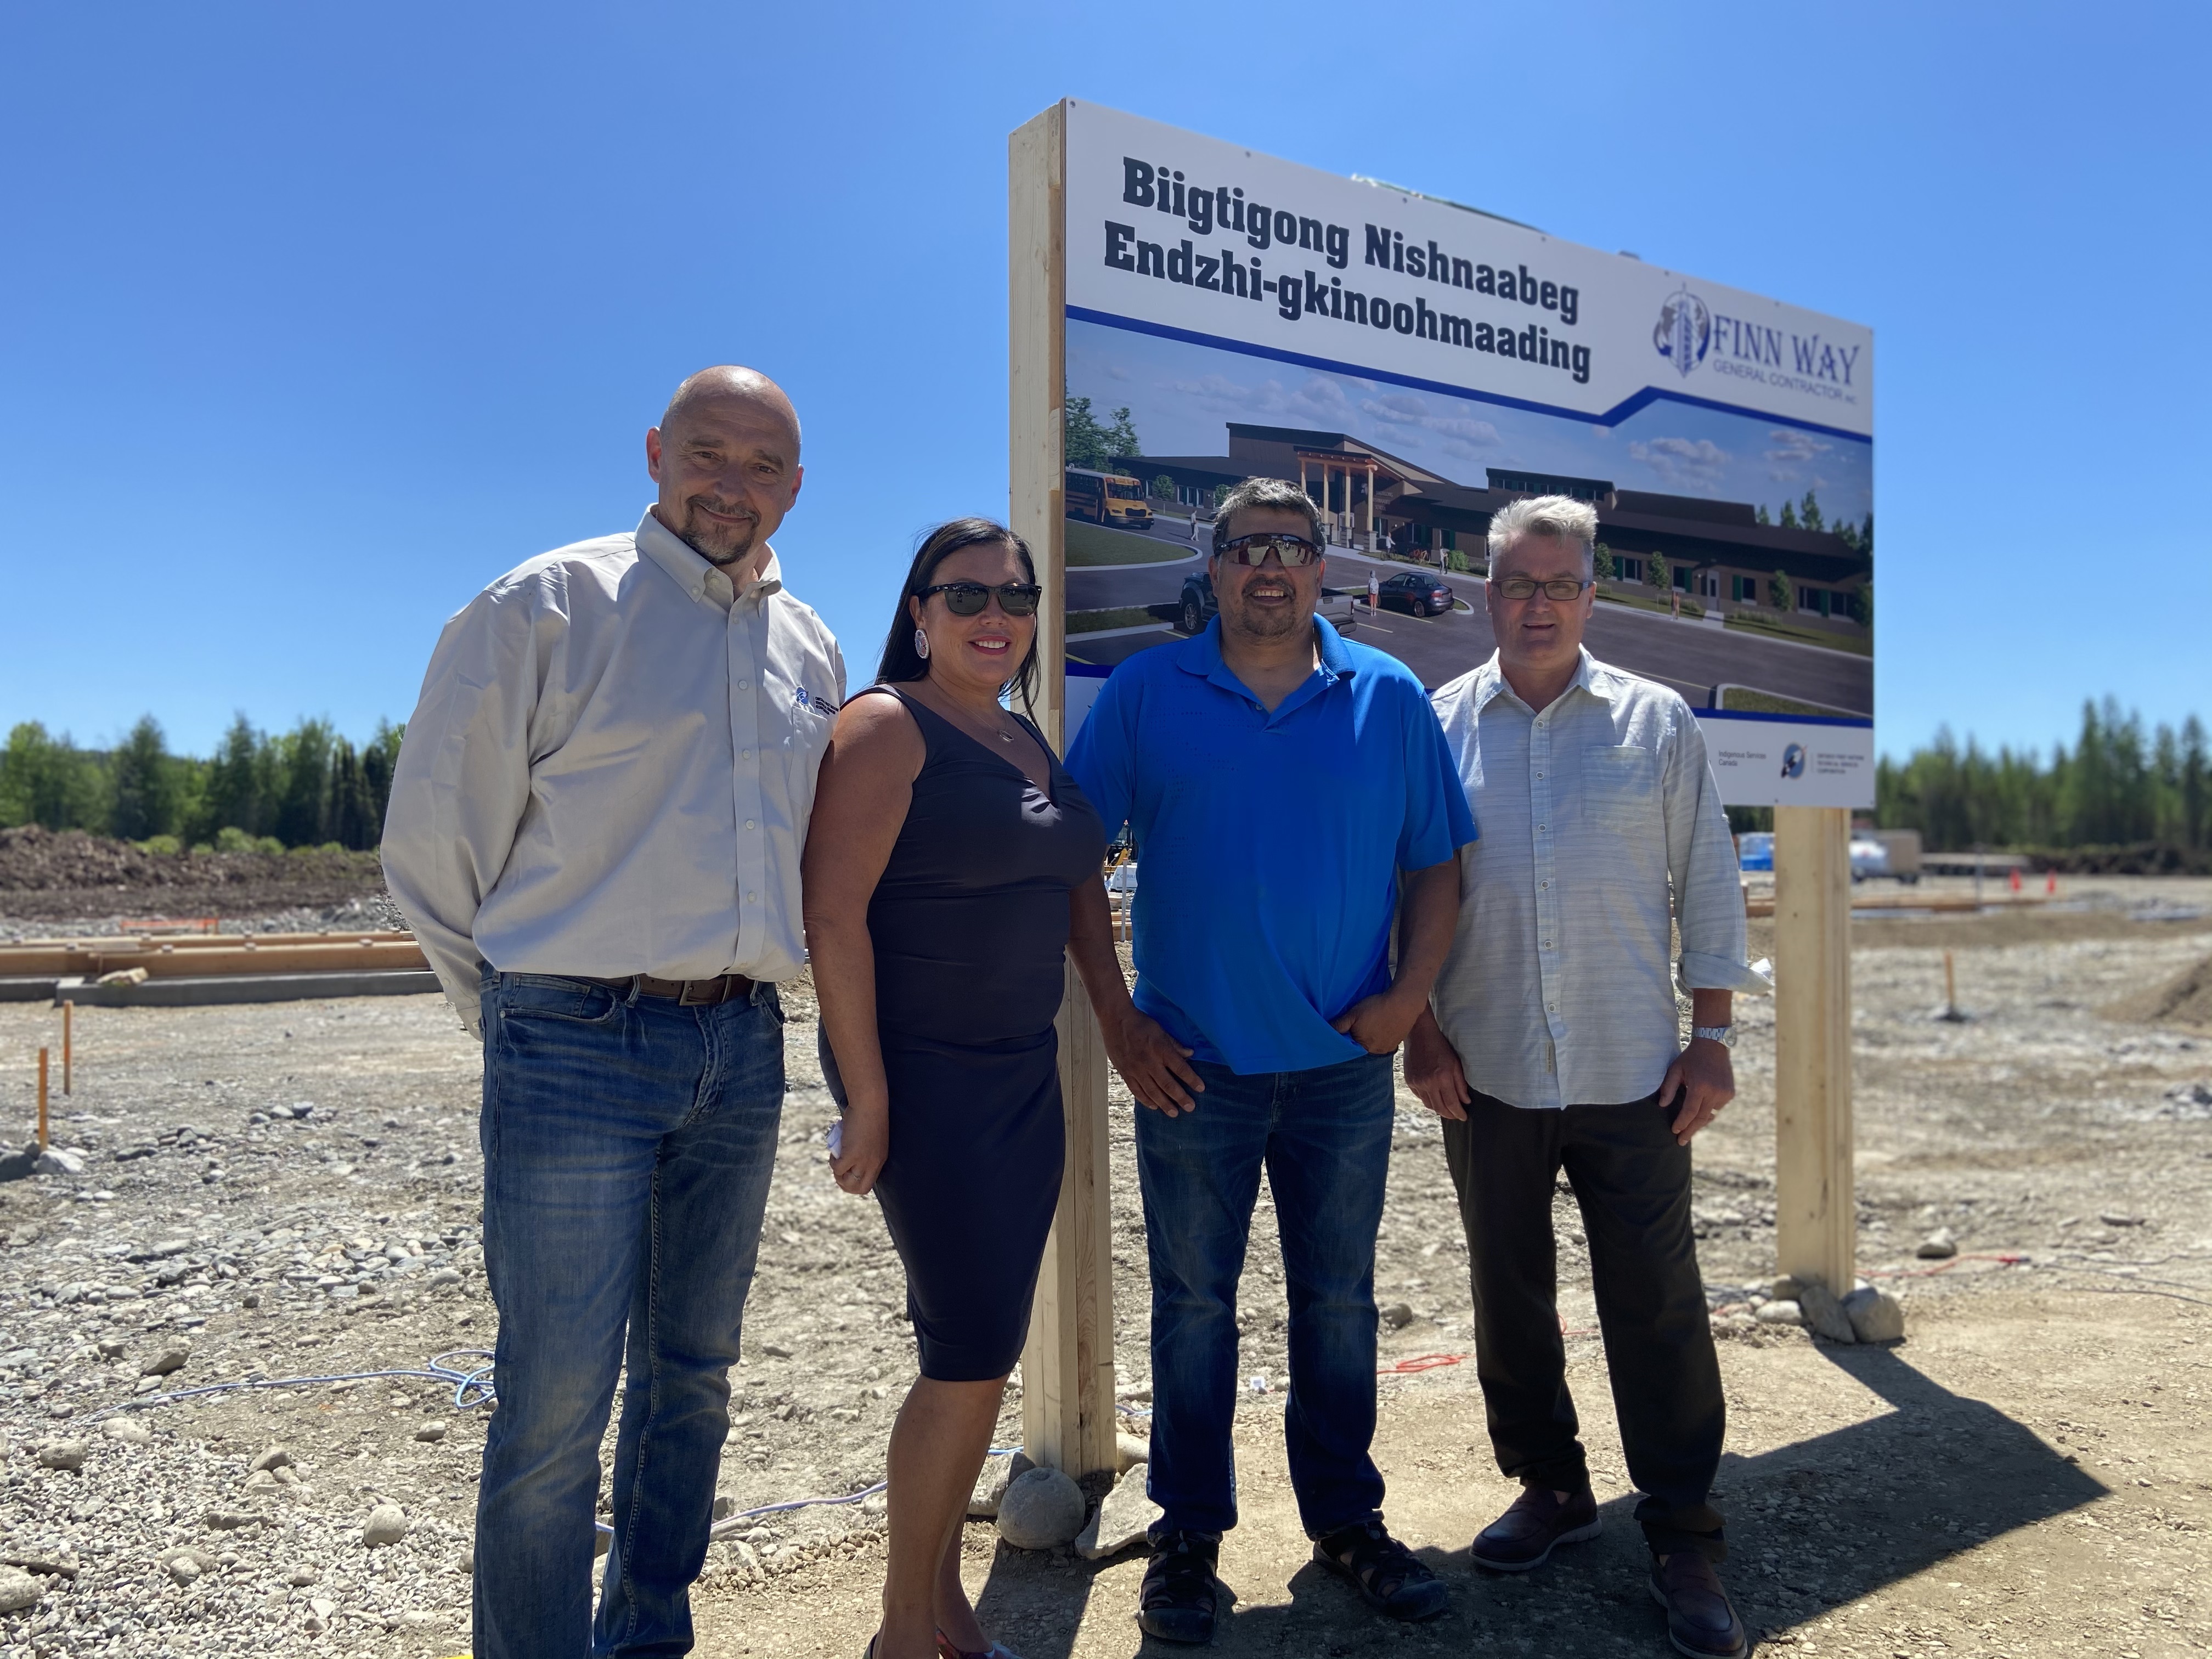 Darko Demitrijevic, Melanie Debassige, Daniel Michano and Glen Goodman stand in front of the construction site and sign for the new school